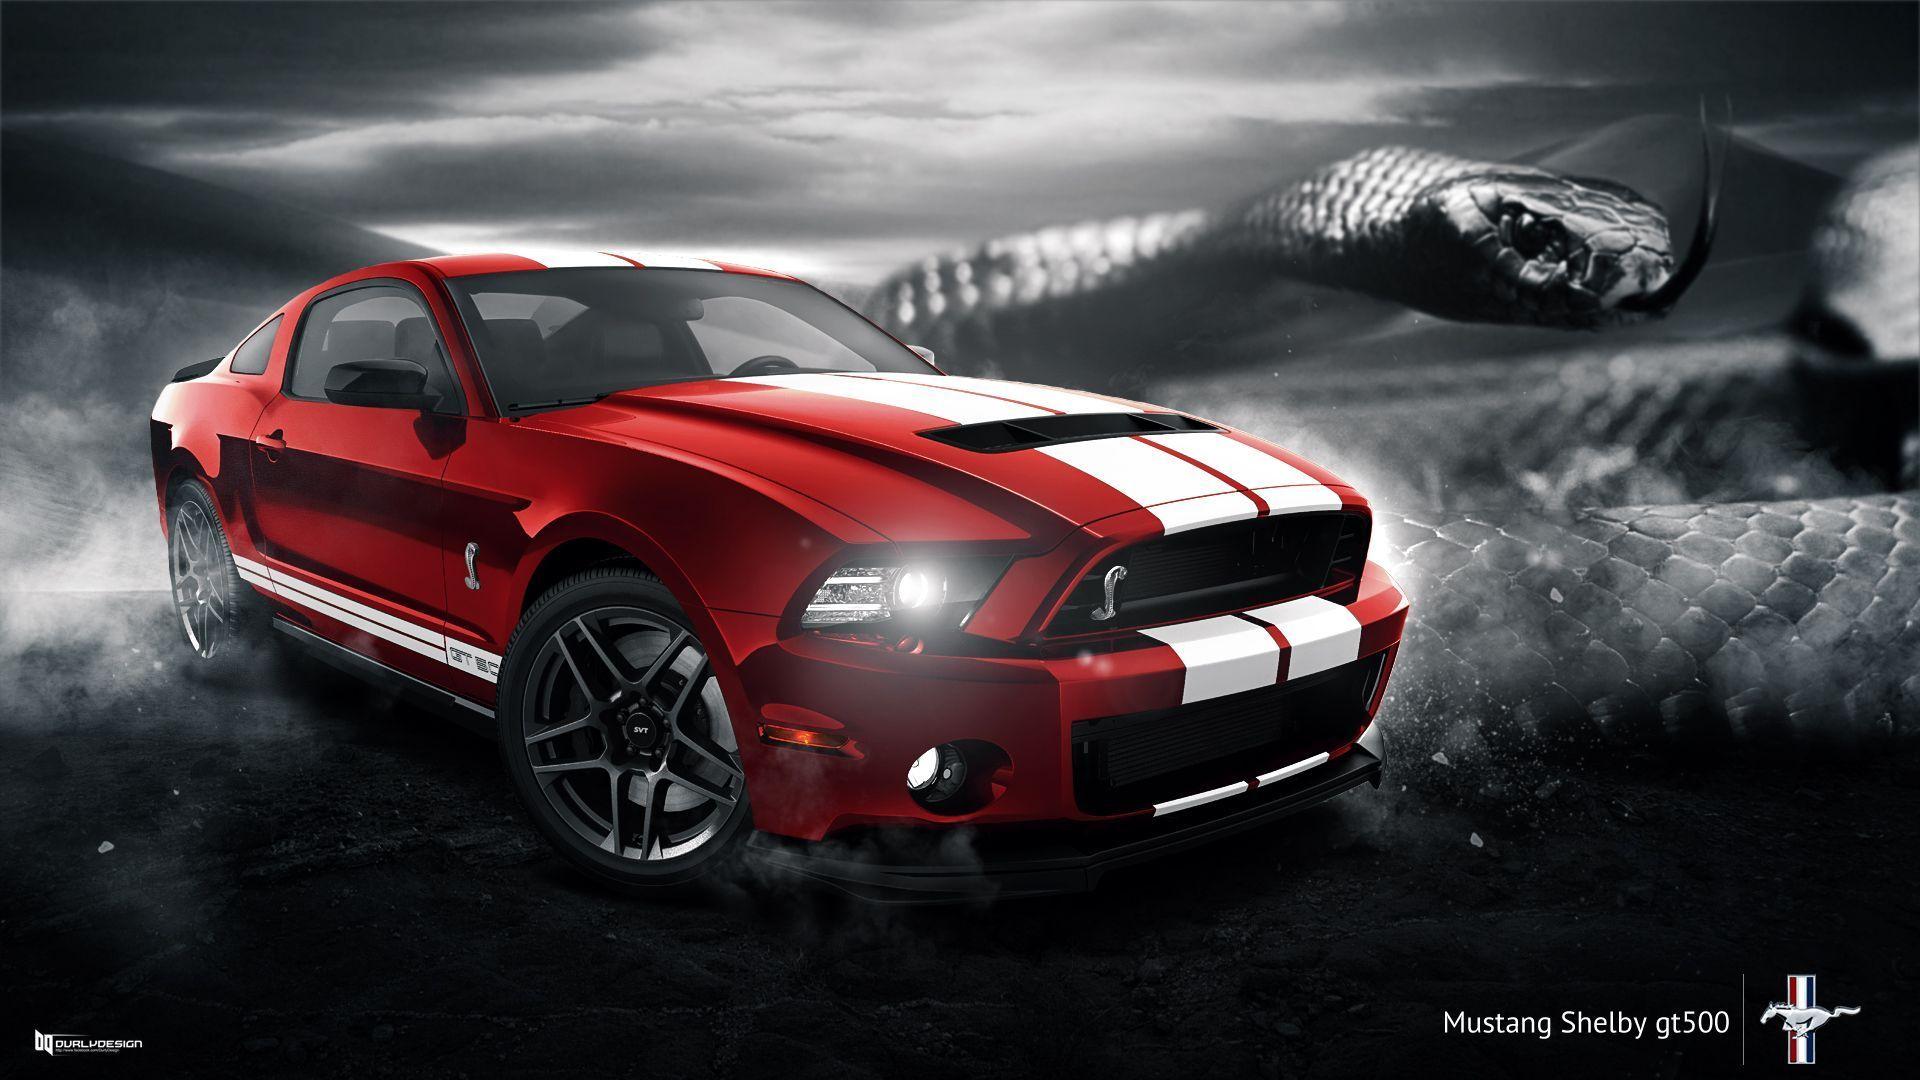 Download Ford Mustang Shelby Gt500 wallpapers for mobile phone free  Ford Mustang Shelby Gt500 HD pictures